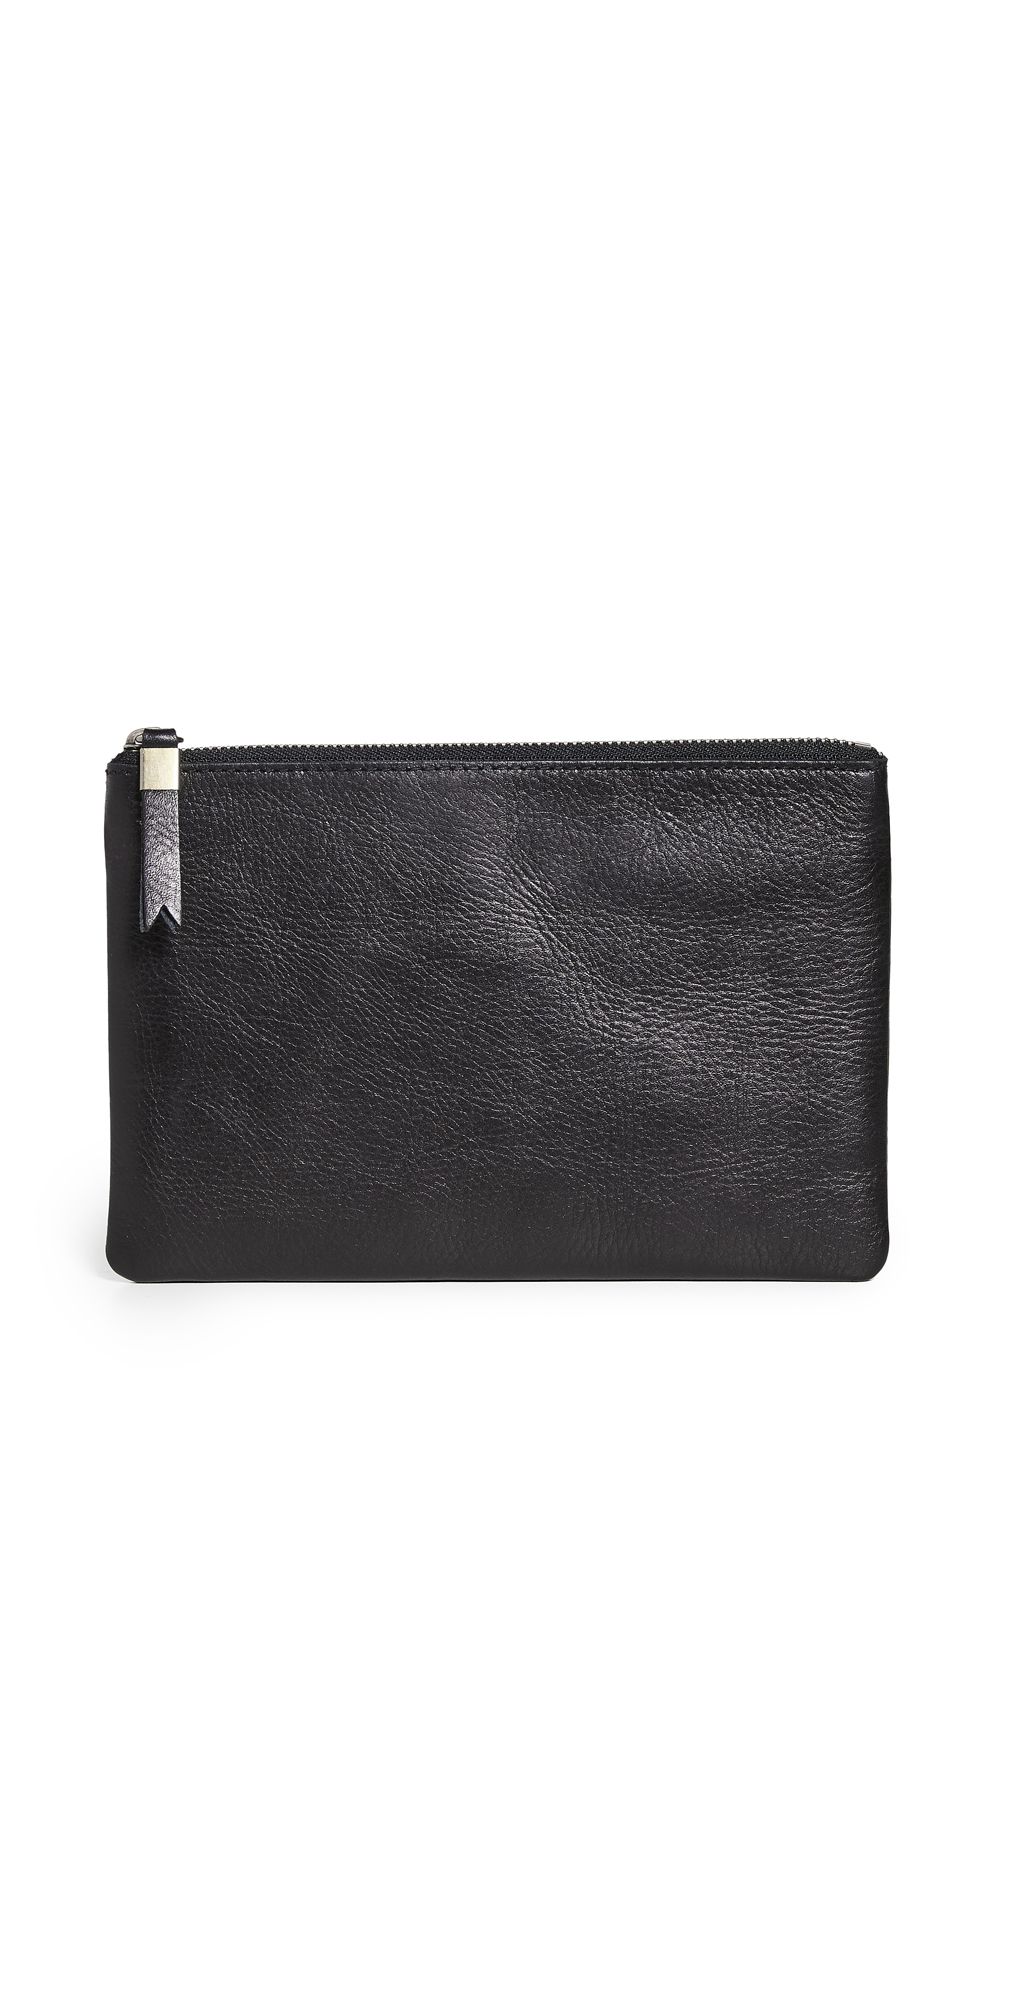 The Leather Pouch Clutch | Shopbop